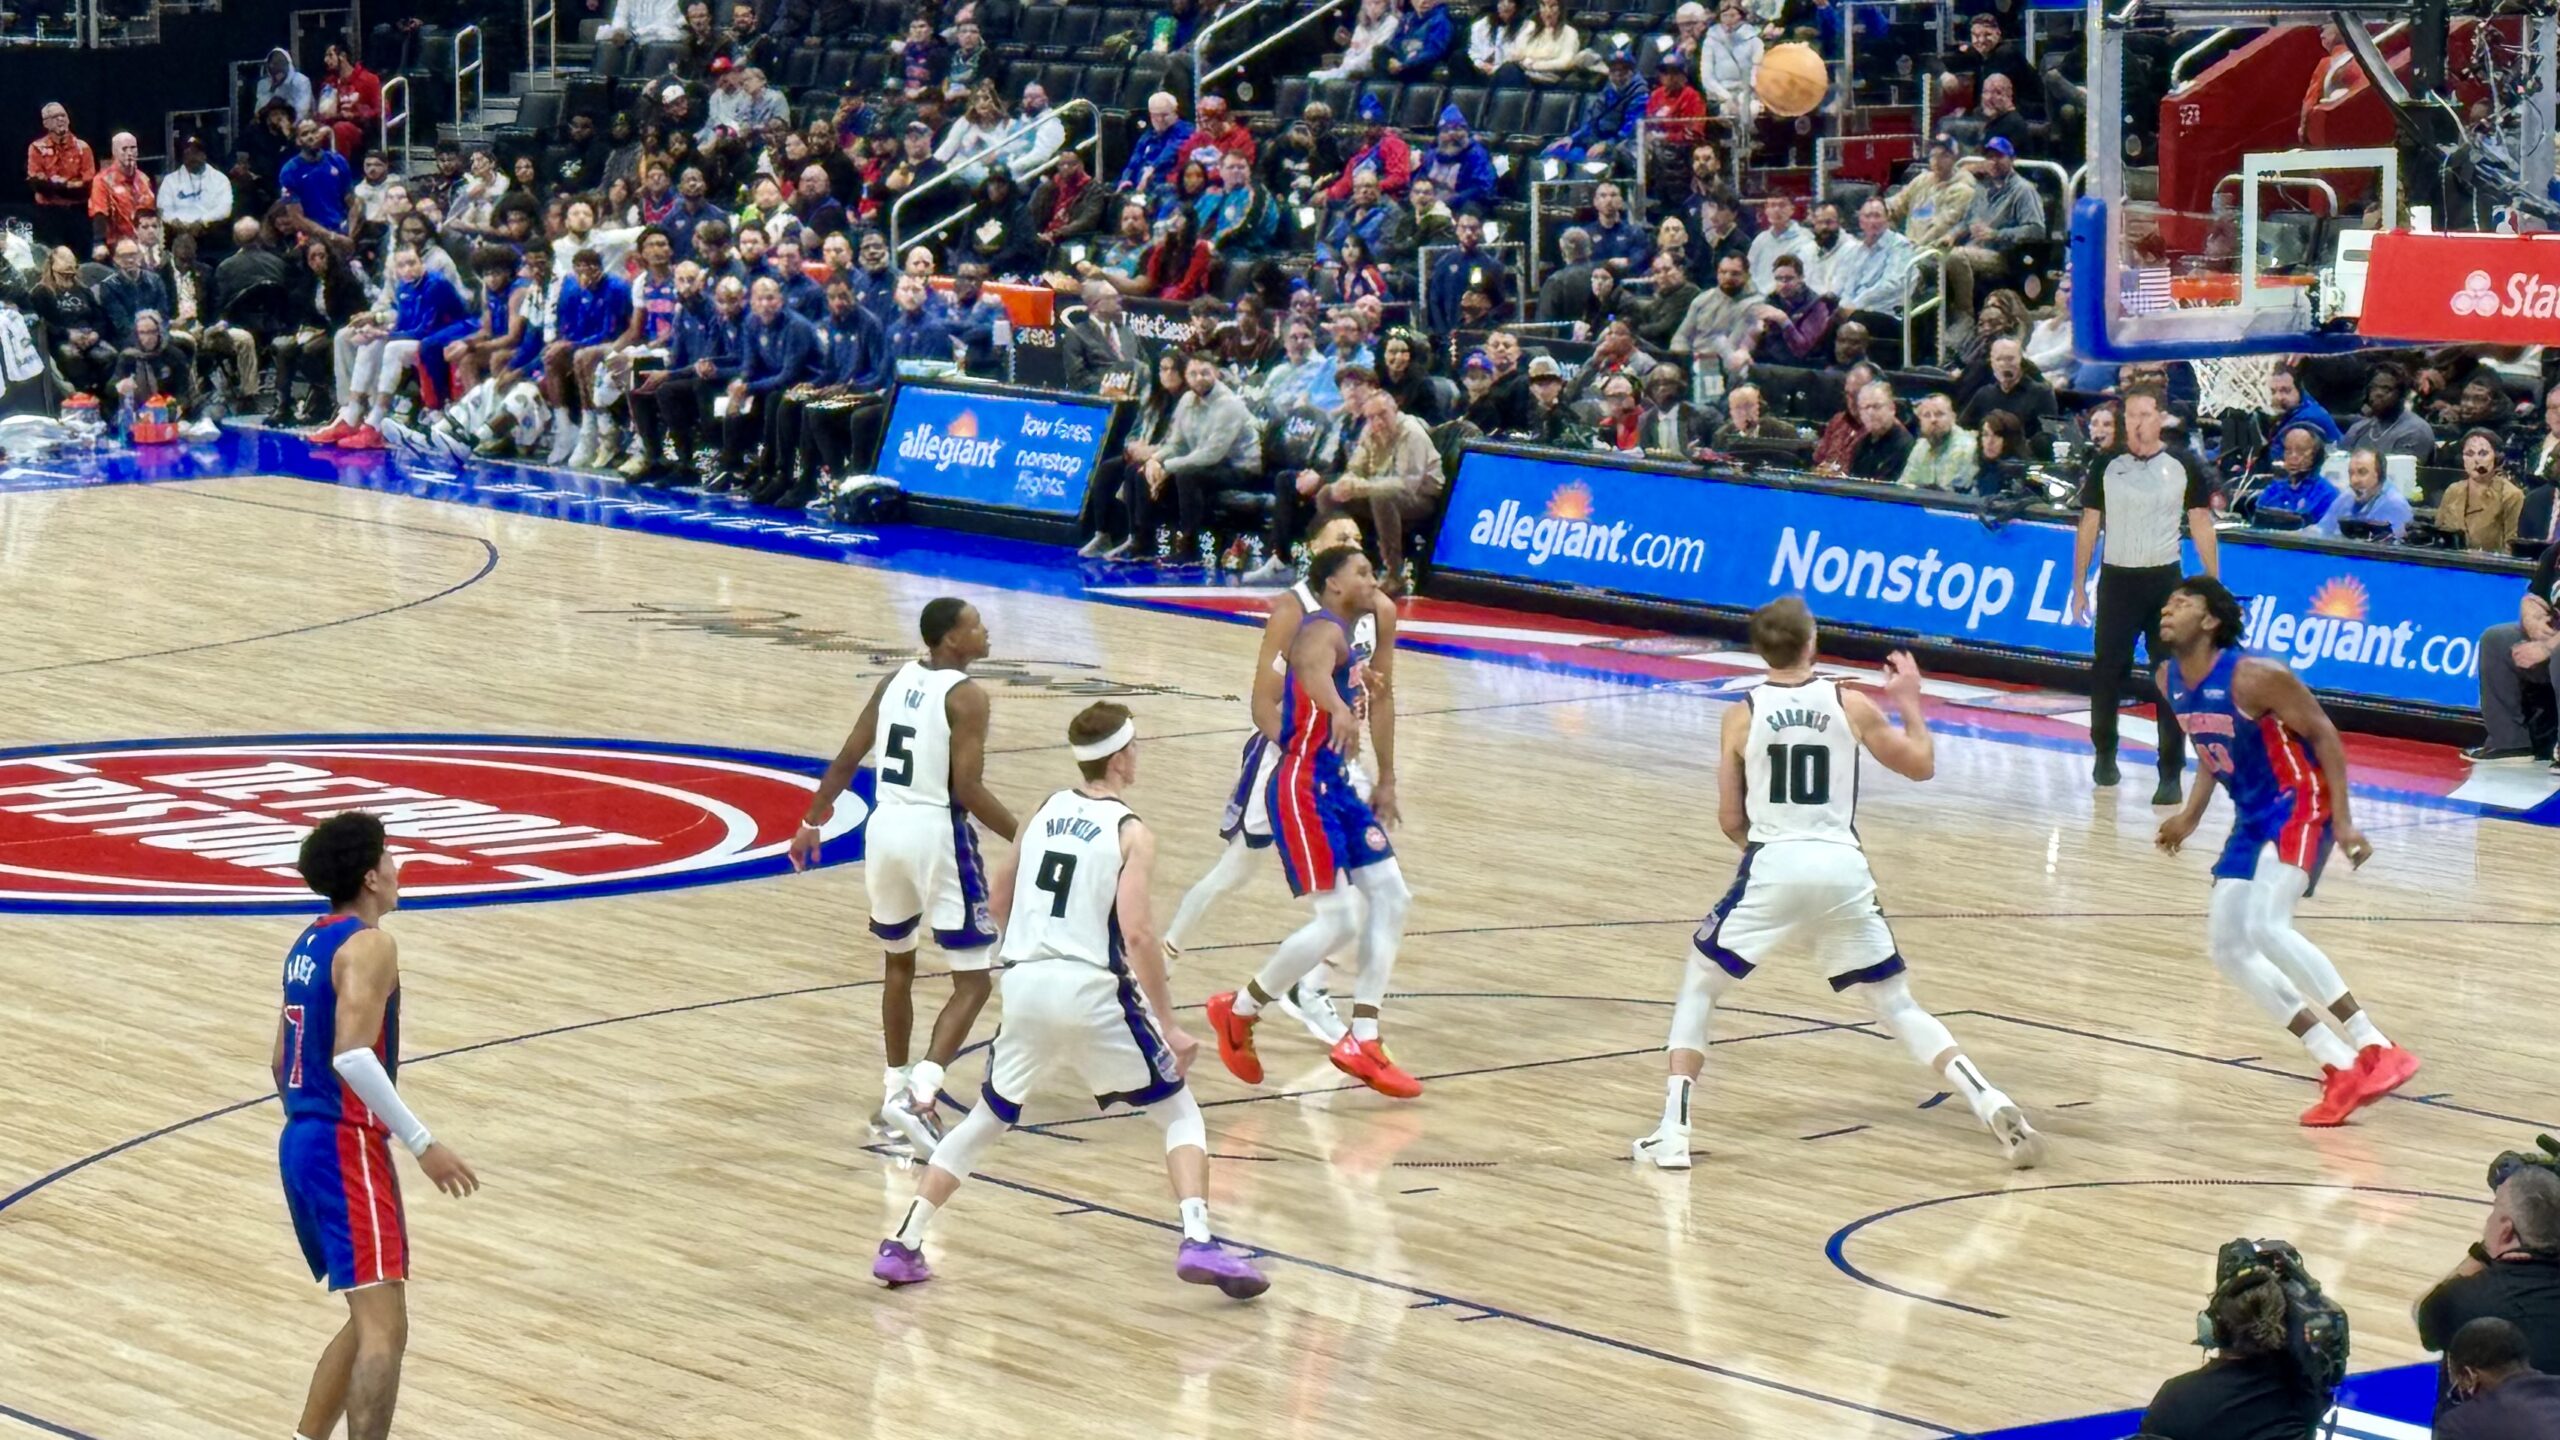 The Detroit Pistons loss to the Sacramento Kings 131-110 in a game where Cade Cunningham was definitely missed. Article by Brandon Dent. Photo Credit: Brandon Dent.